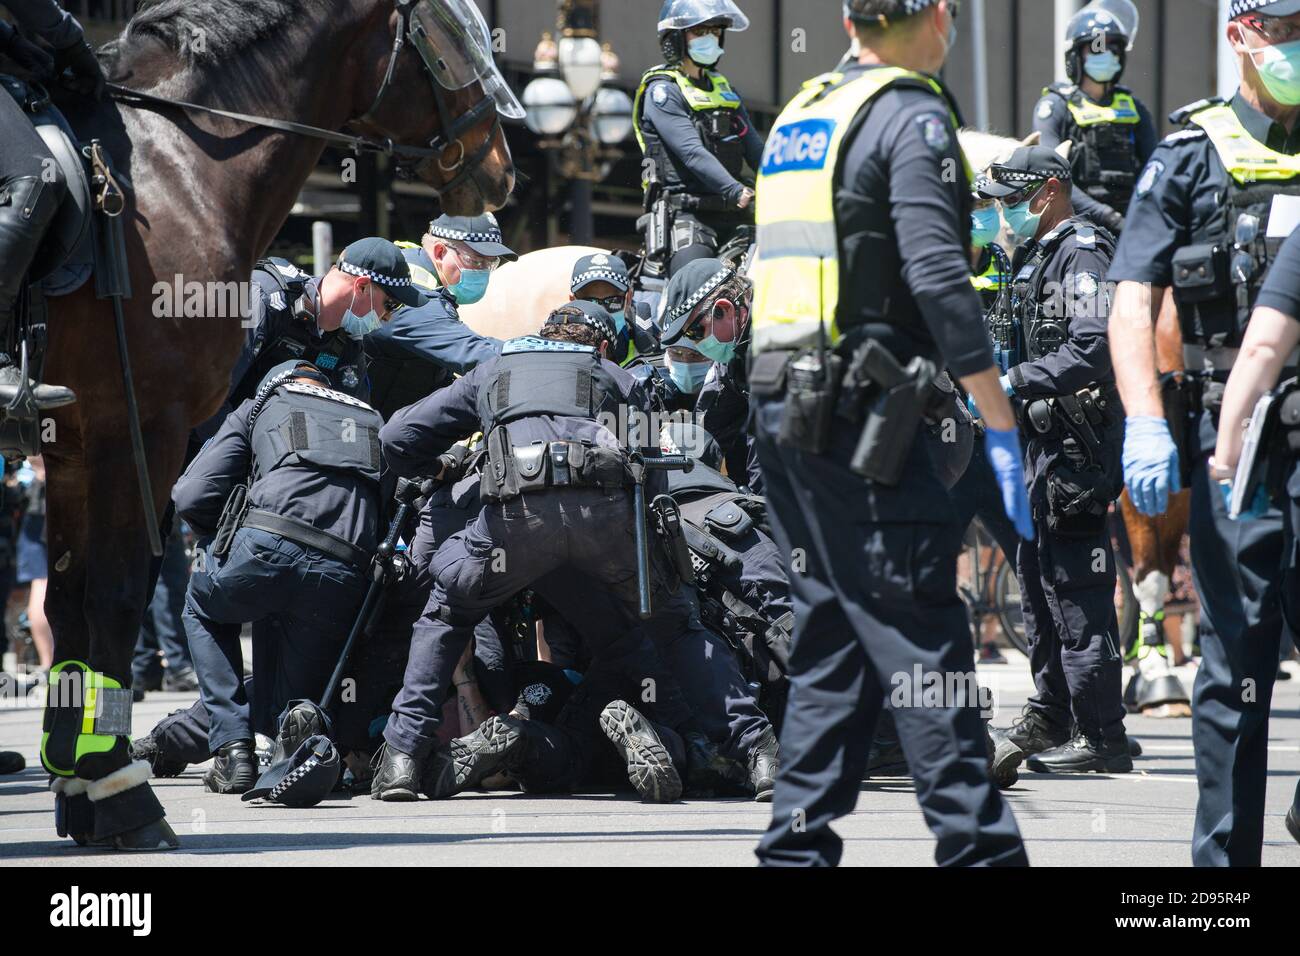 Melbourne, Australia 03 Nov 2020, a group of police wrestle with a man on the ground as they attempt to handcuff him after taking final action to end the protest and fine all the protesters at the State Parliament during another Freedom Day demonstration on Melbourne Cup Day demanding the sacking of Premier Daniel Andrews over lockdown laws. Credit: Michael Currie/Alamy Live News Stock Photo